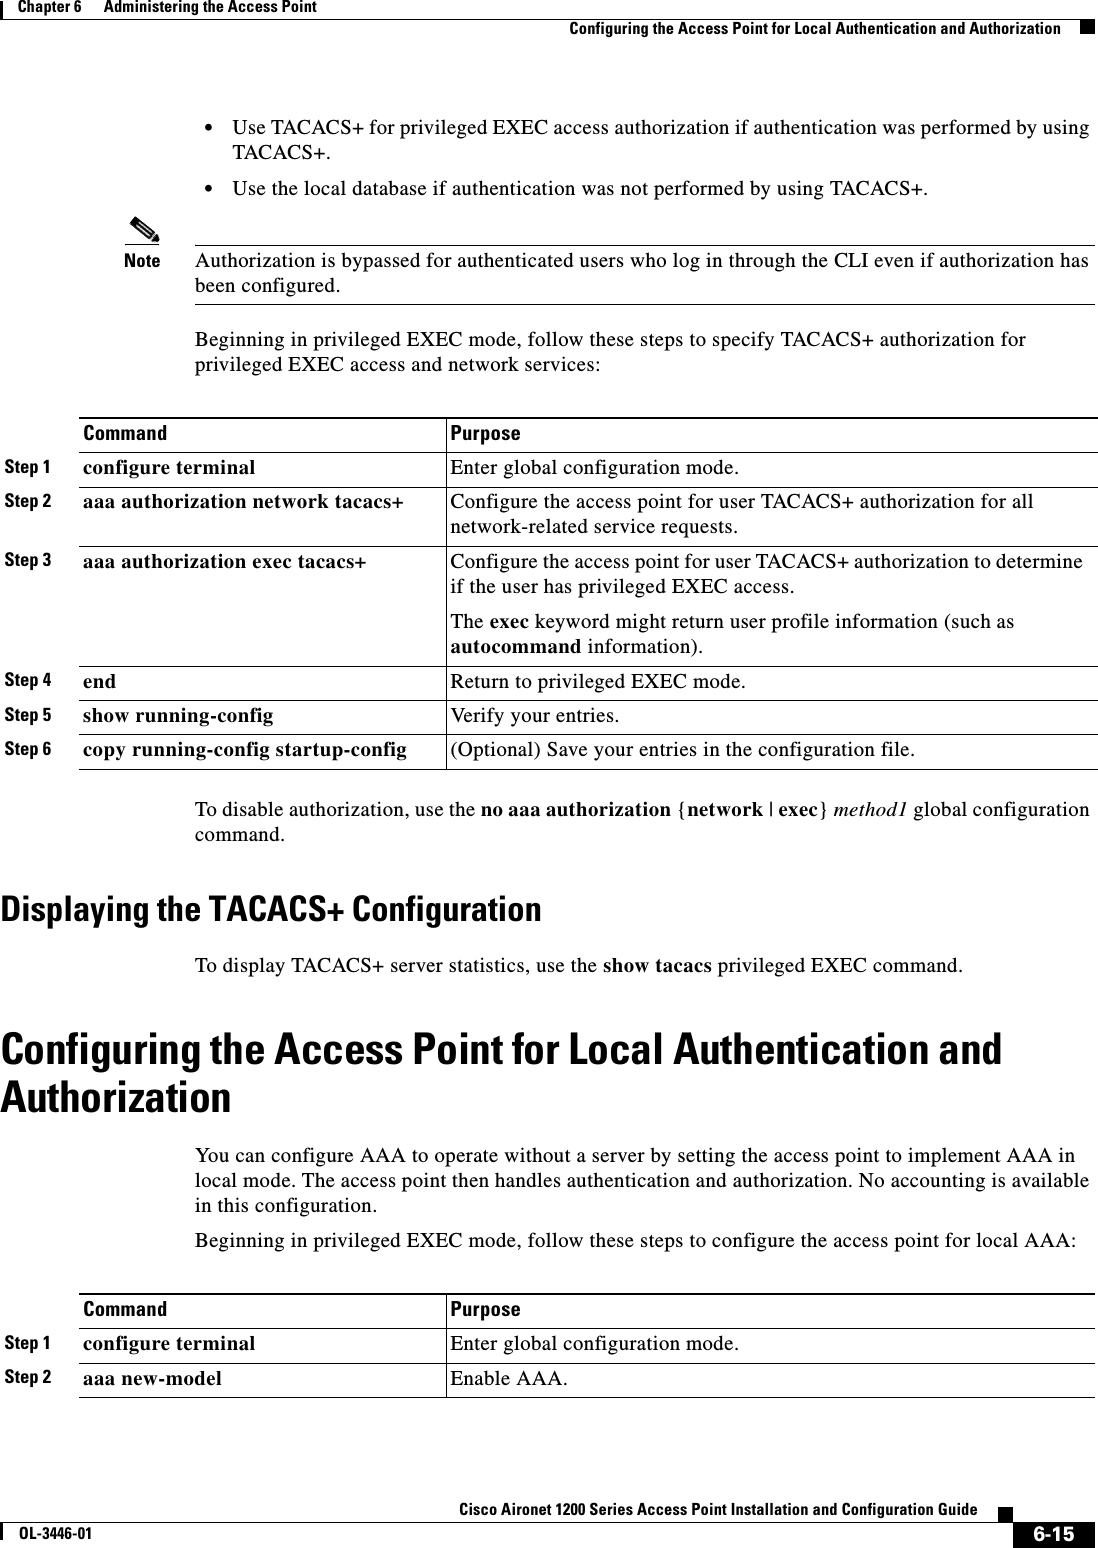 6-15Cisco Aironet 1200 Series Access Point Installation and Configuration GuideOL-3446-01Chapter 6      Administering the Access PointConfiguring the Access Point for Local Authentication and Authorization•Use TACACS+ for privileged EXEC access authorization if authentication was performed by using TACACS+.•Use the local database if authentication was not performed by using TACACS+.Note Authorization is bypassed for authenticated users who log in through the CLI even if authorization has been configured.Beginning in privileged EXEC mode, follow these steps to specify TACACS+ authorization for privileged EXEC access and network services: To disable authorization, use the no aaa authorization {network | exec}method1 global configuration command. Displaying the TACACS+ ConfigurationTo display TACACS+ server statistics, use the show tacacs privileged EXEC command.Configuring the Access Point for Local Authentication and AuthorizationYou can configure AAA to operate without a server by setting the access point to implement AAA in local mode. The access point then handles authentication and authorization. No accounting is available in this configuration.Beginning in privileged EXEC mode, follow these steps to configure the access point for local AAA:Command PurposeStep 1 configure terminal Enter global configuration mode.Step 2 aaa authorization network tacacs+ Configure the access point for user TACACS+ authorization for all network-related service requests.Step 3 aaa authorization exec tacacs+ Configure the access point for user TACACS+ authorization to determine if the user has privileged EXEC access. The exec keyword might return user profile information (such as autocommand information). Step 4 end Return to privileged EXEC mode.Step 5 show running-config Verify your entries.Step 6 copy running-config startup-config (Optional) Save your entries in the configuration file.Command PurposeStep 1 configure terminal Enter global configuration mode.Step 2 aaa new-model Enable AAA.